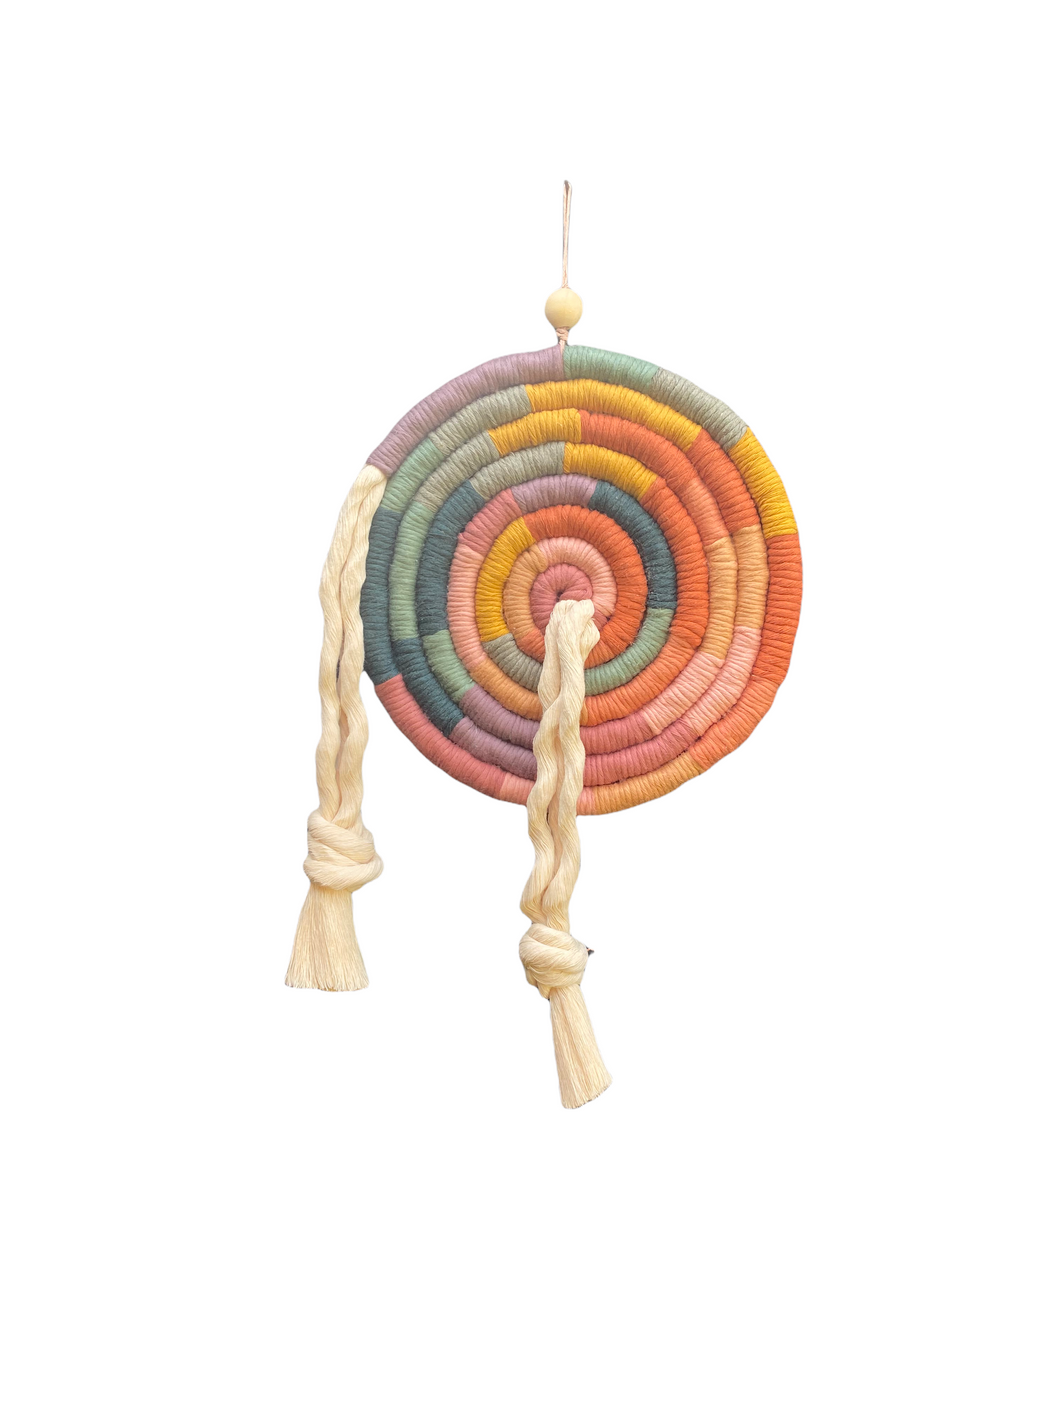 *SOLD*Rainbow Spiral Wall Hanging